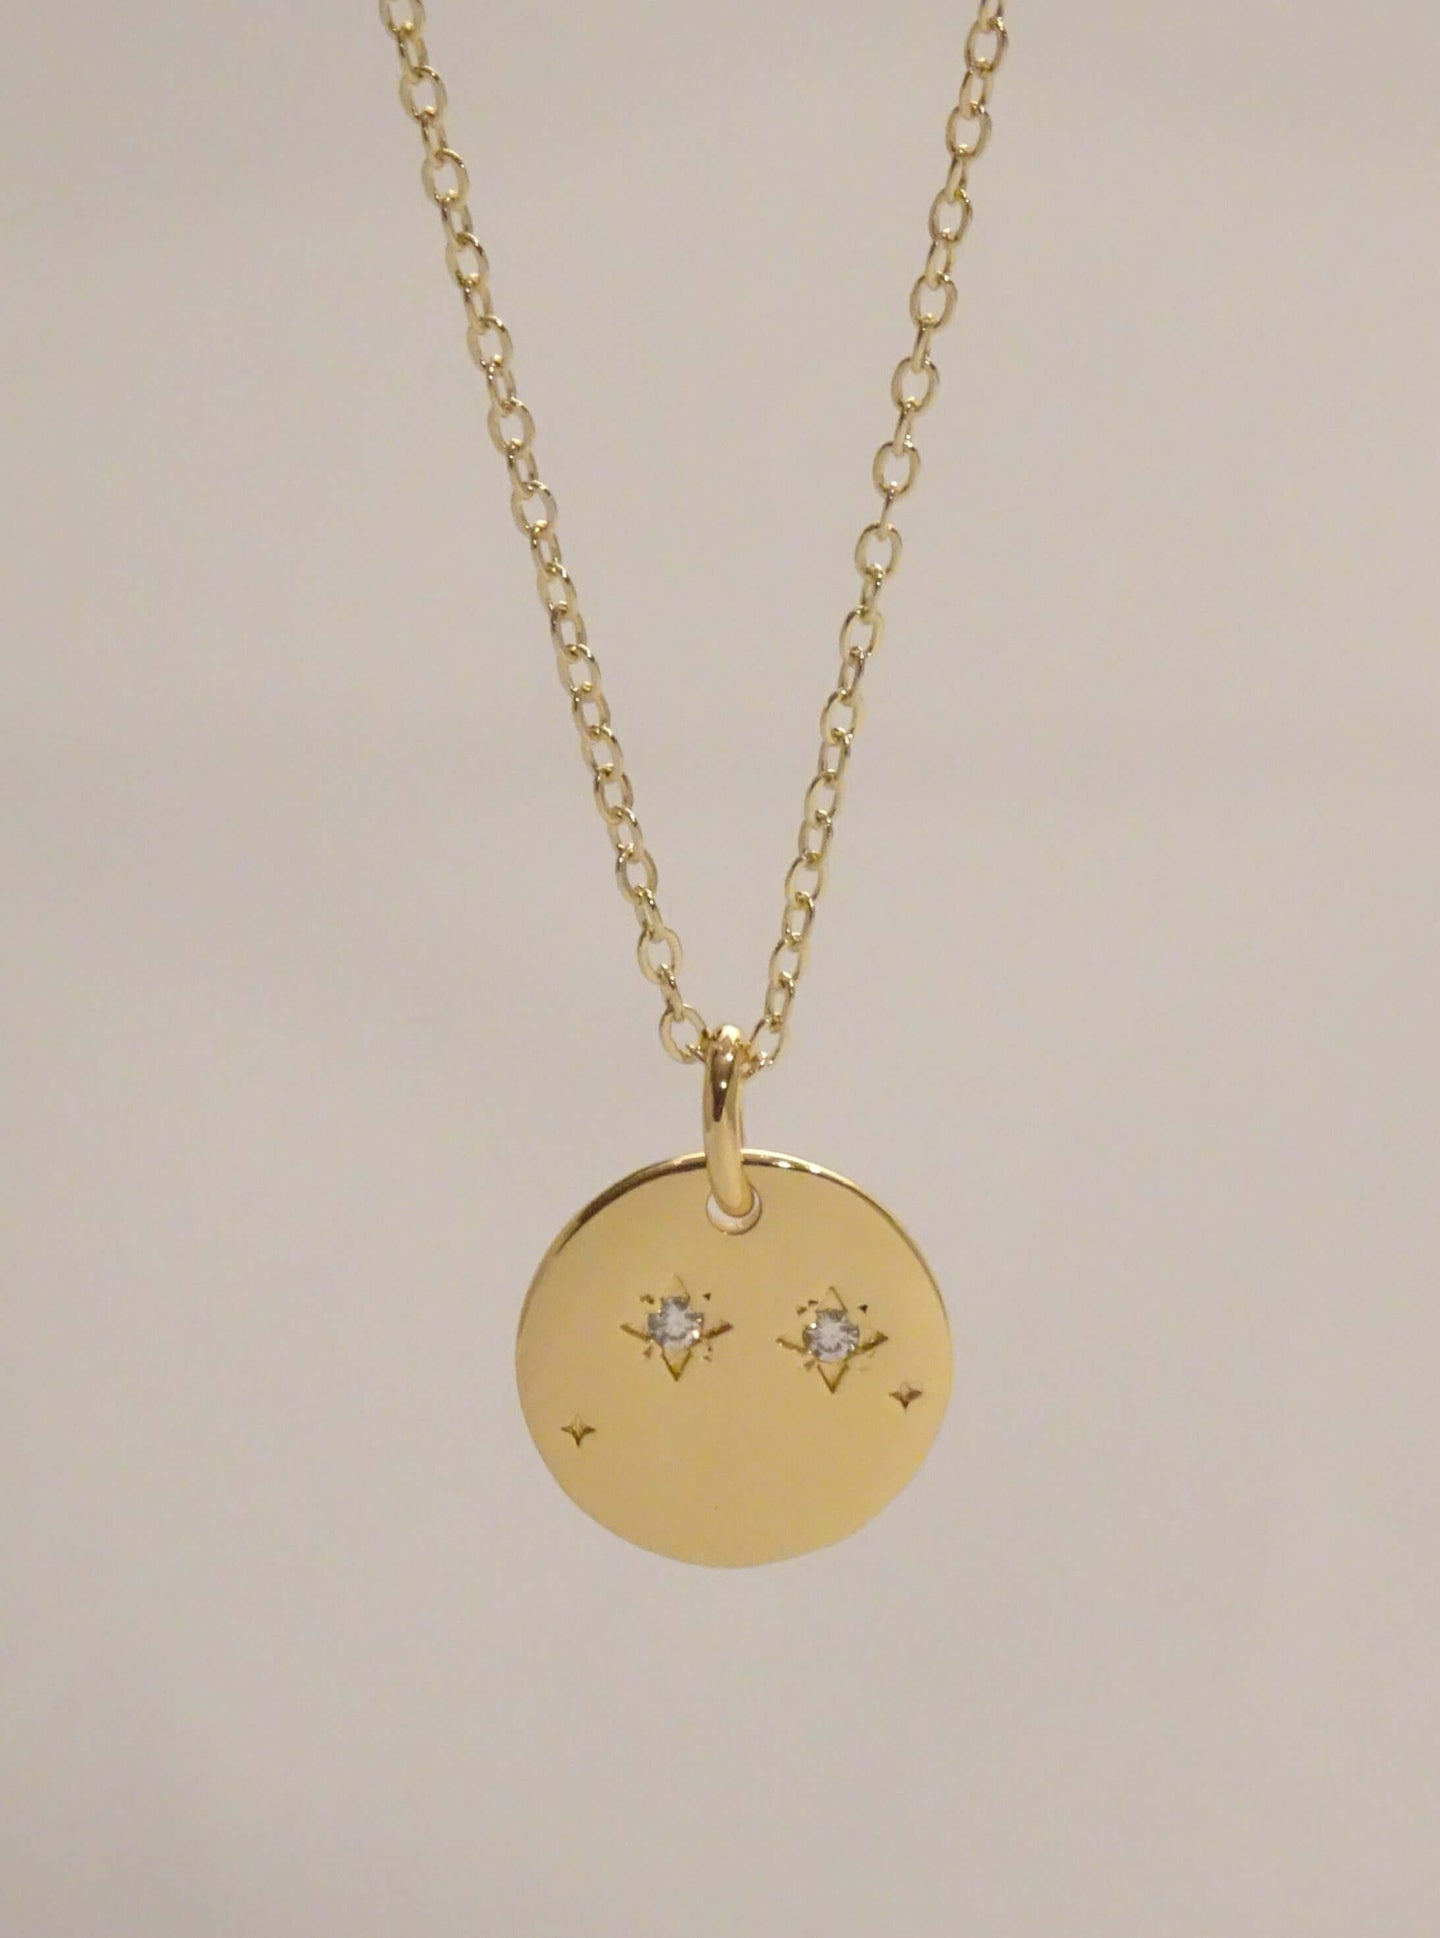 Aries necklace, Aries necklace silver, Aries necklace constellations, Aries necklace aesthetic, Aries coin necklace, zodiac necklace, constellation necklace, star sign necklace gold, zodiac jewelry, zodiac pendant, layering necklaces gold